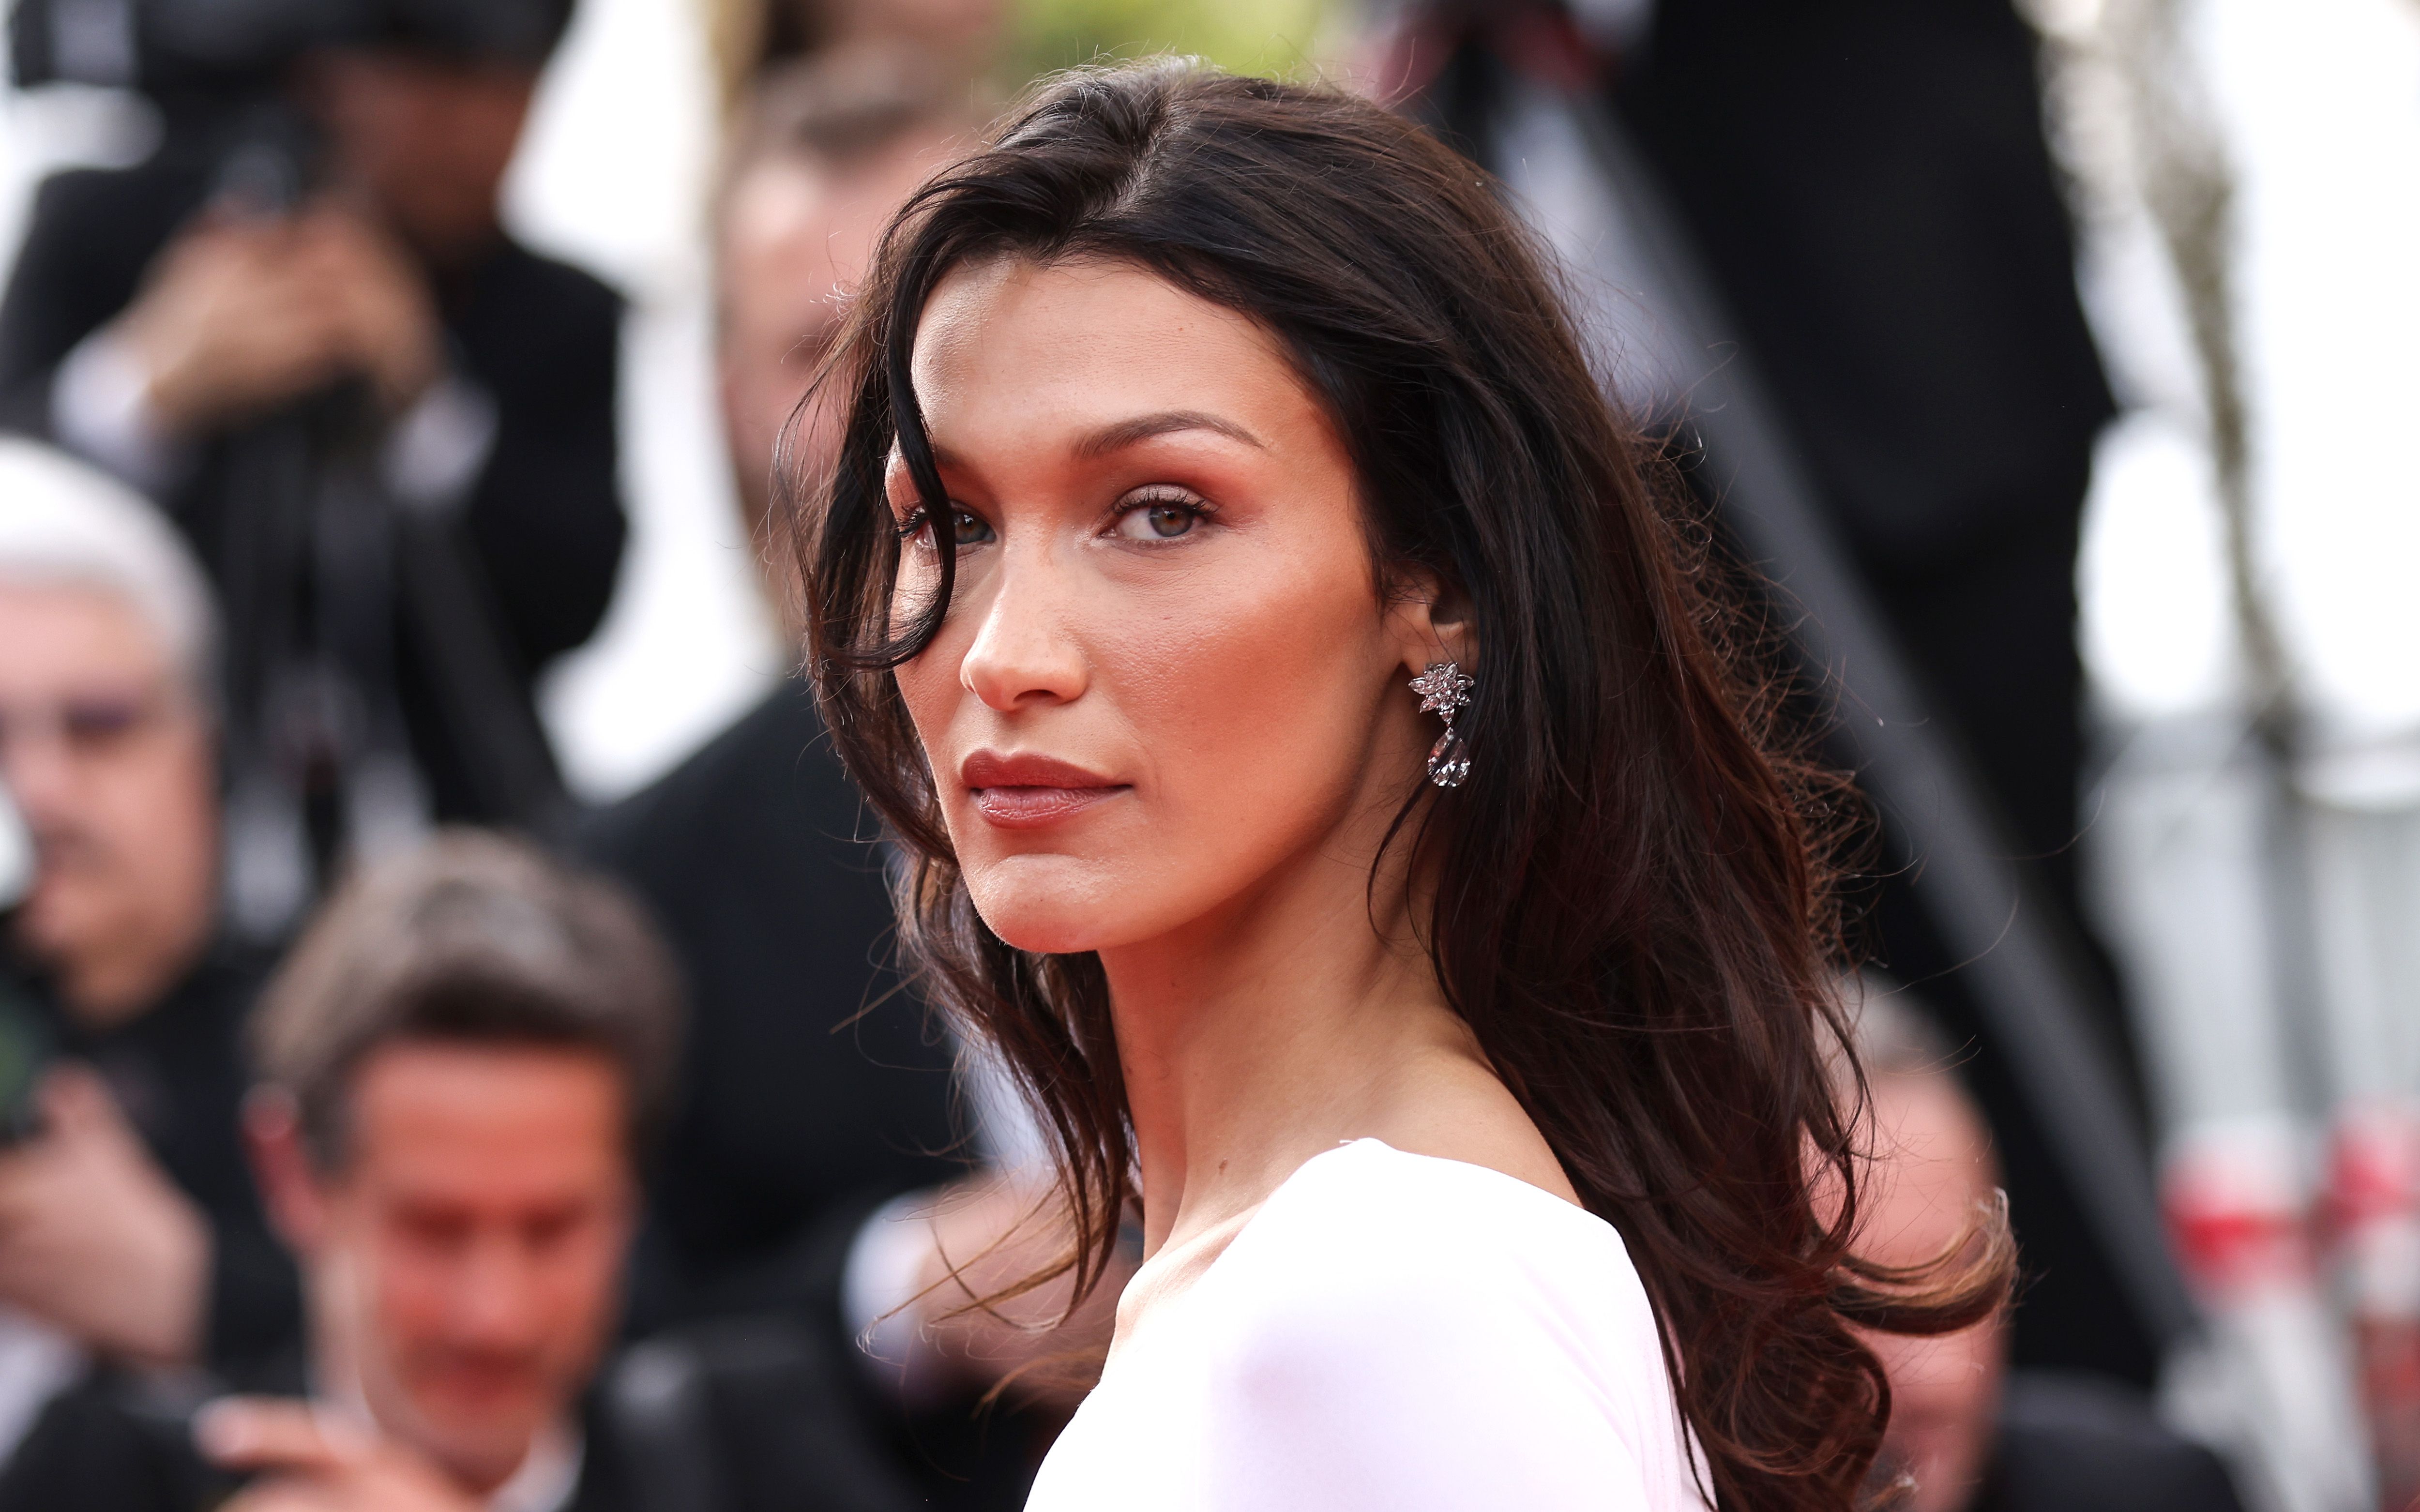 bella hadid looks stunning as she heads to the louis vuitton